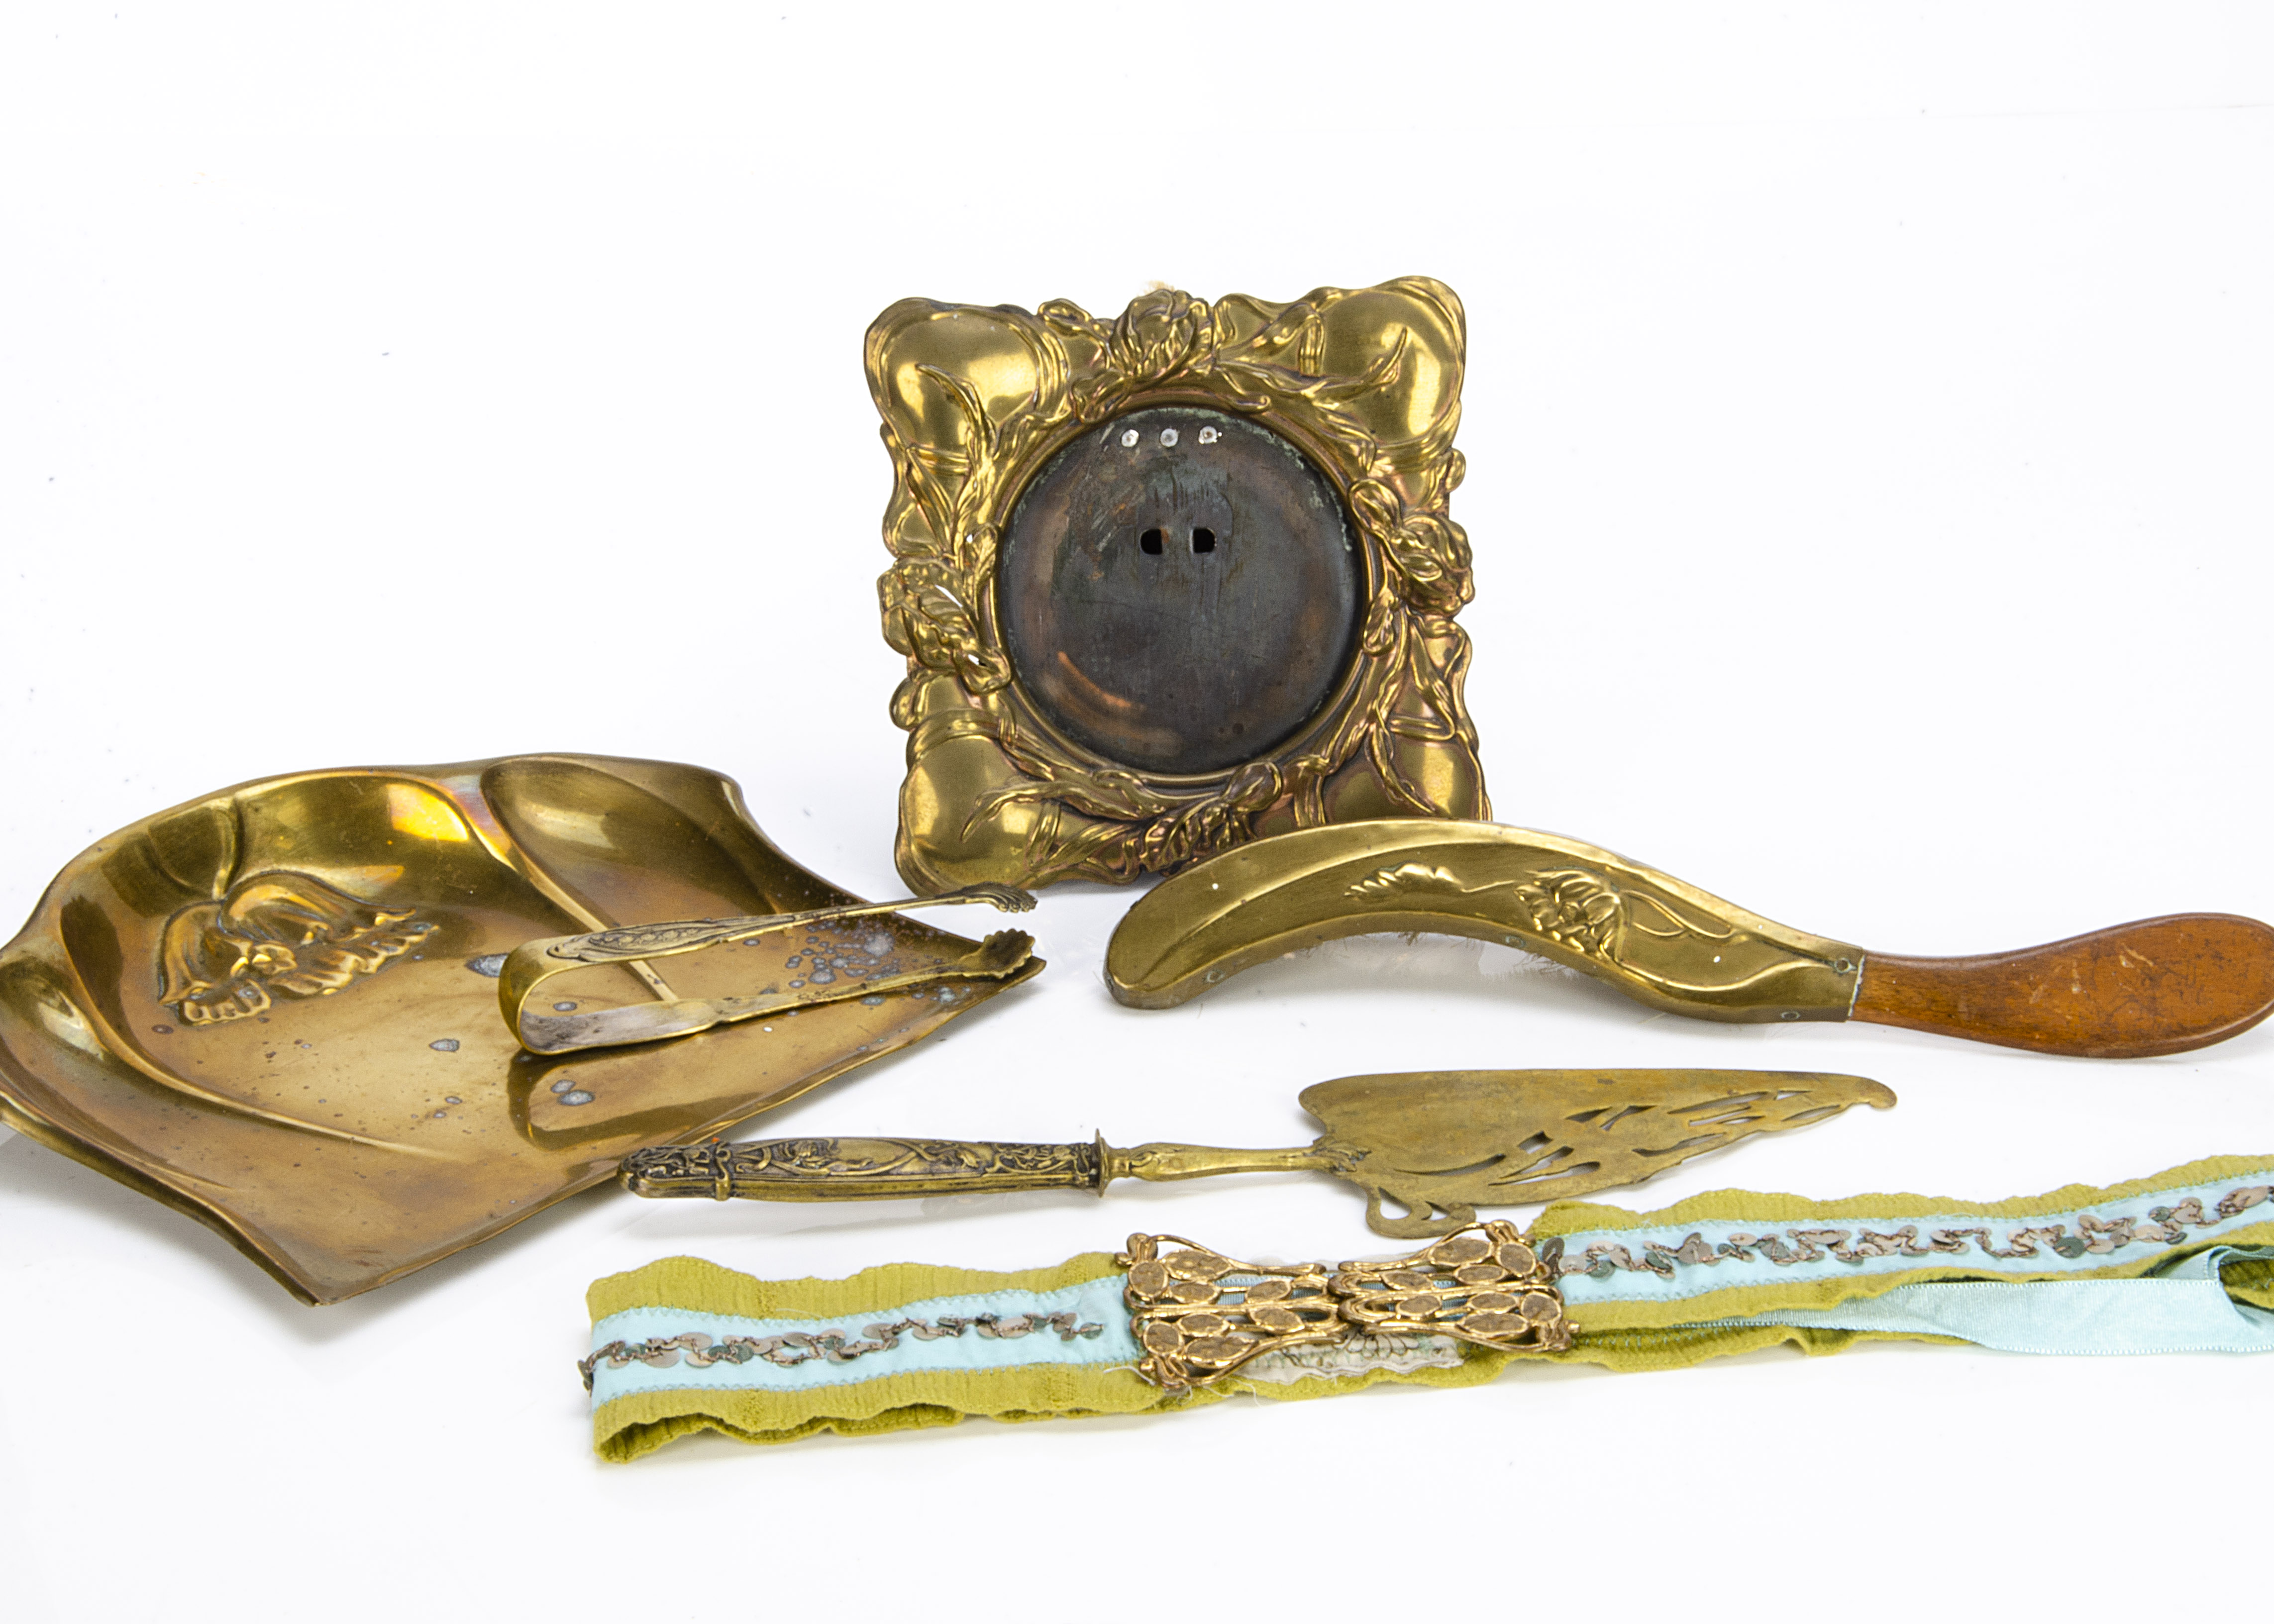 A collection of pressed brass Art Nouveau ware, including a crumb tray and brush, pressed photograph